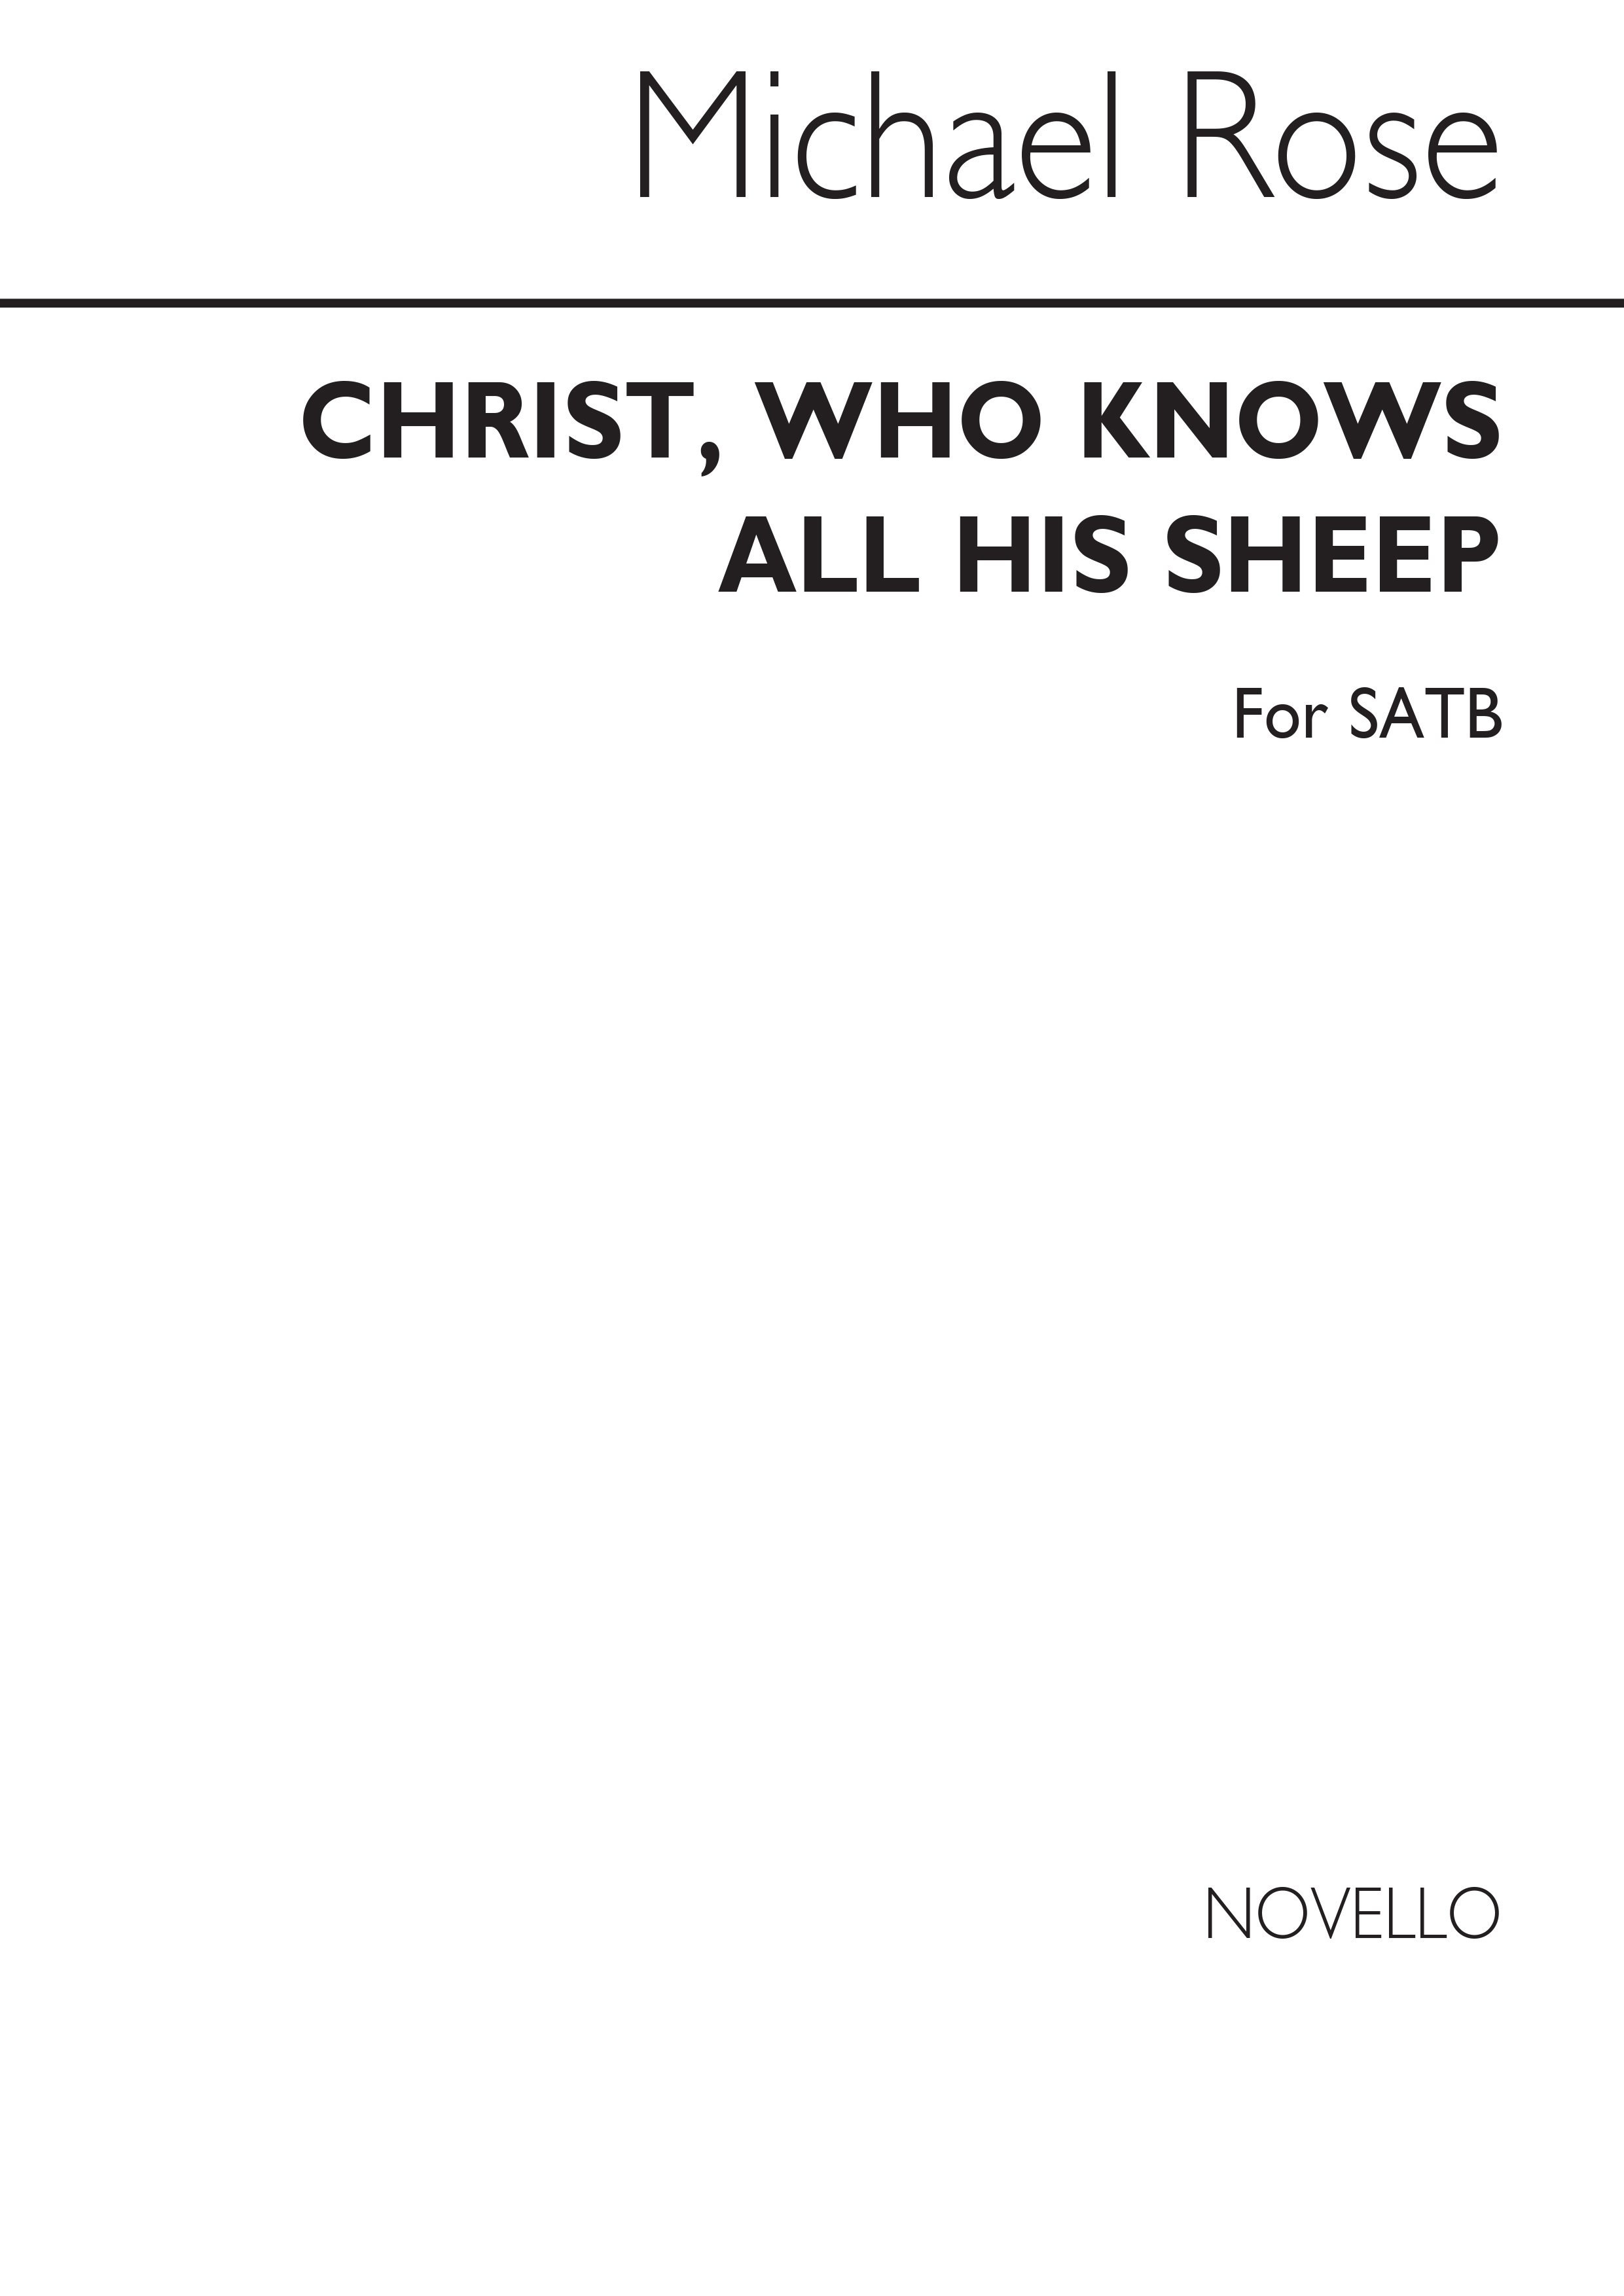 Michael Rose: Christ, Who Knows All His Sheep